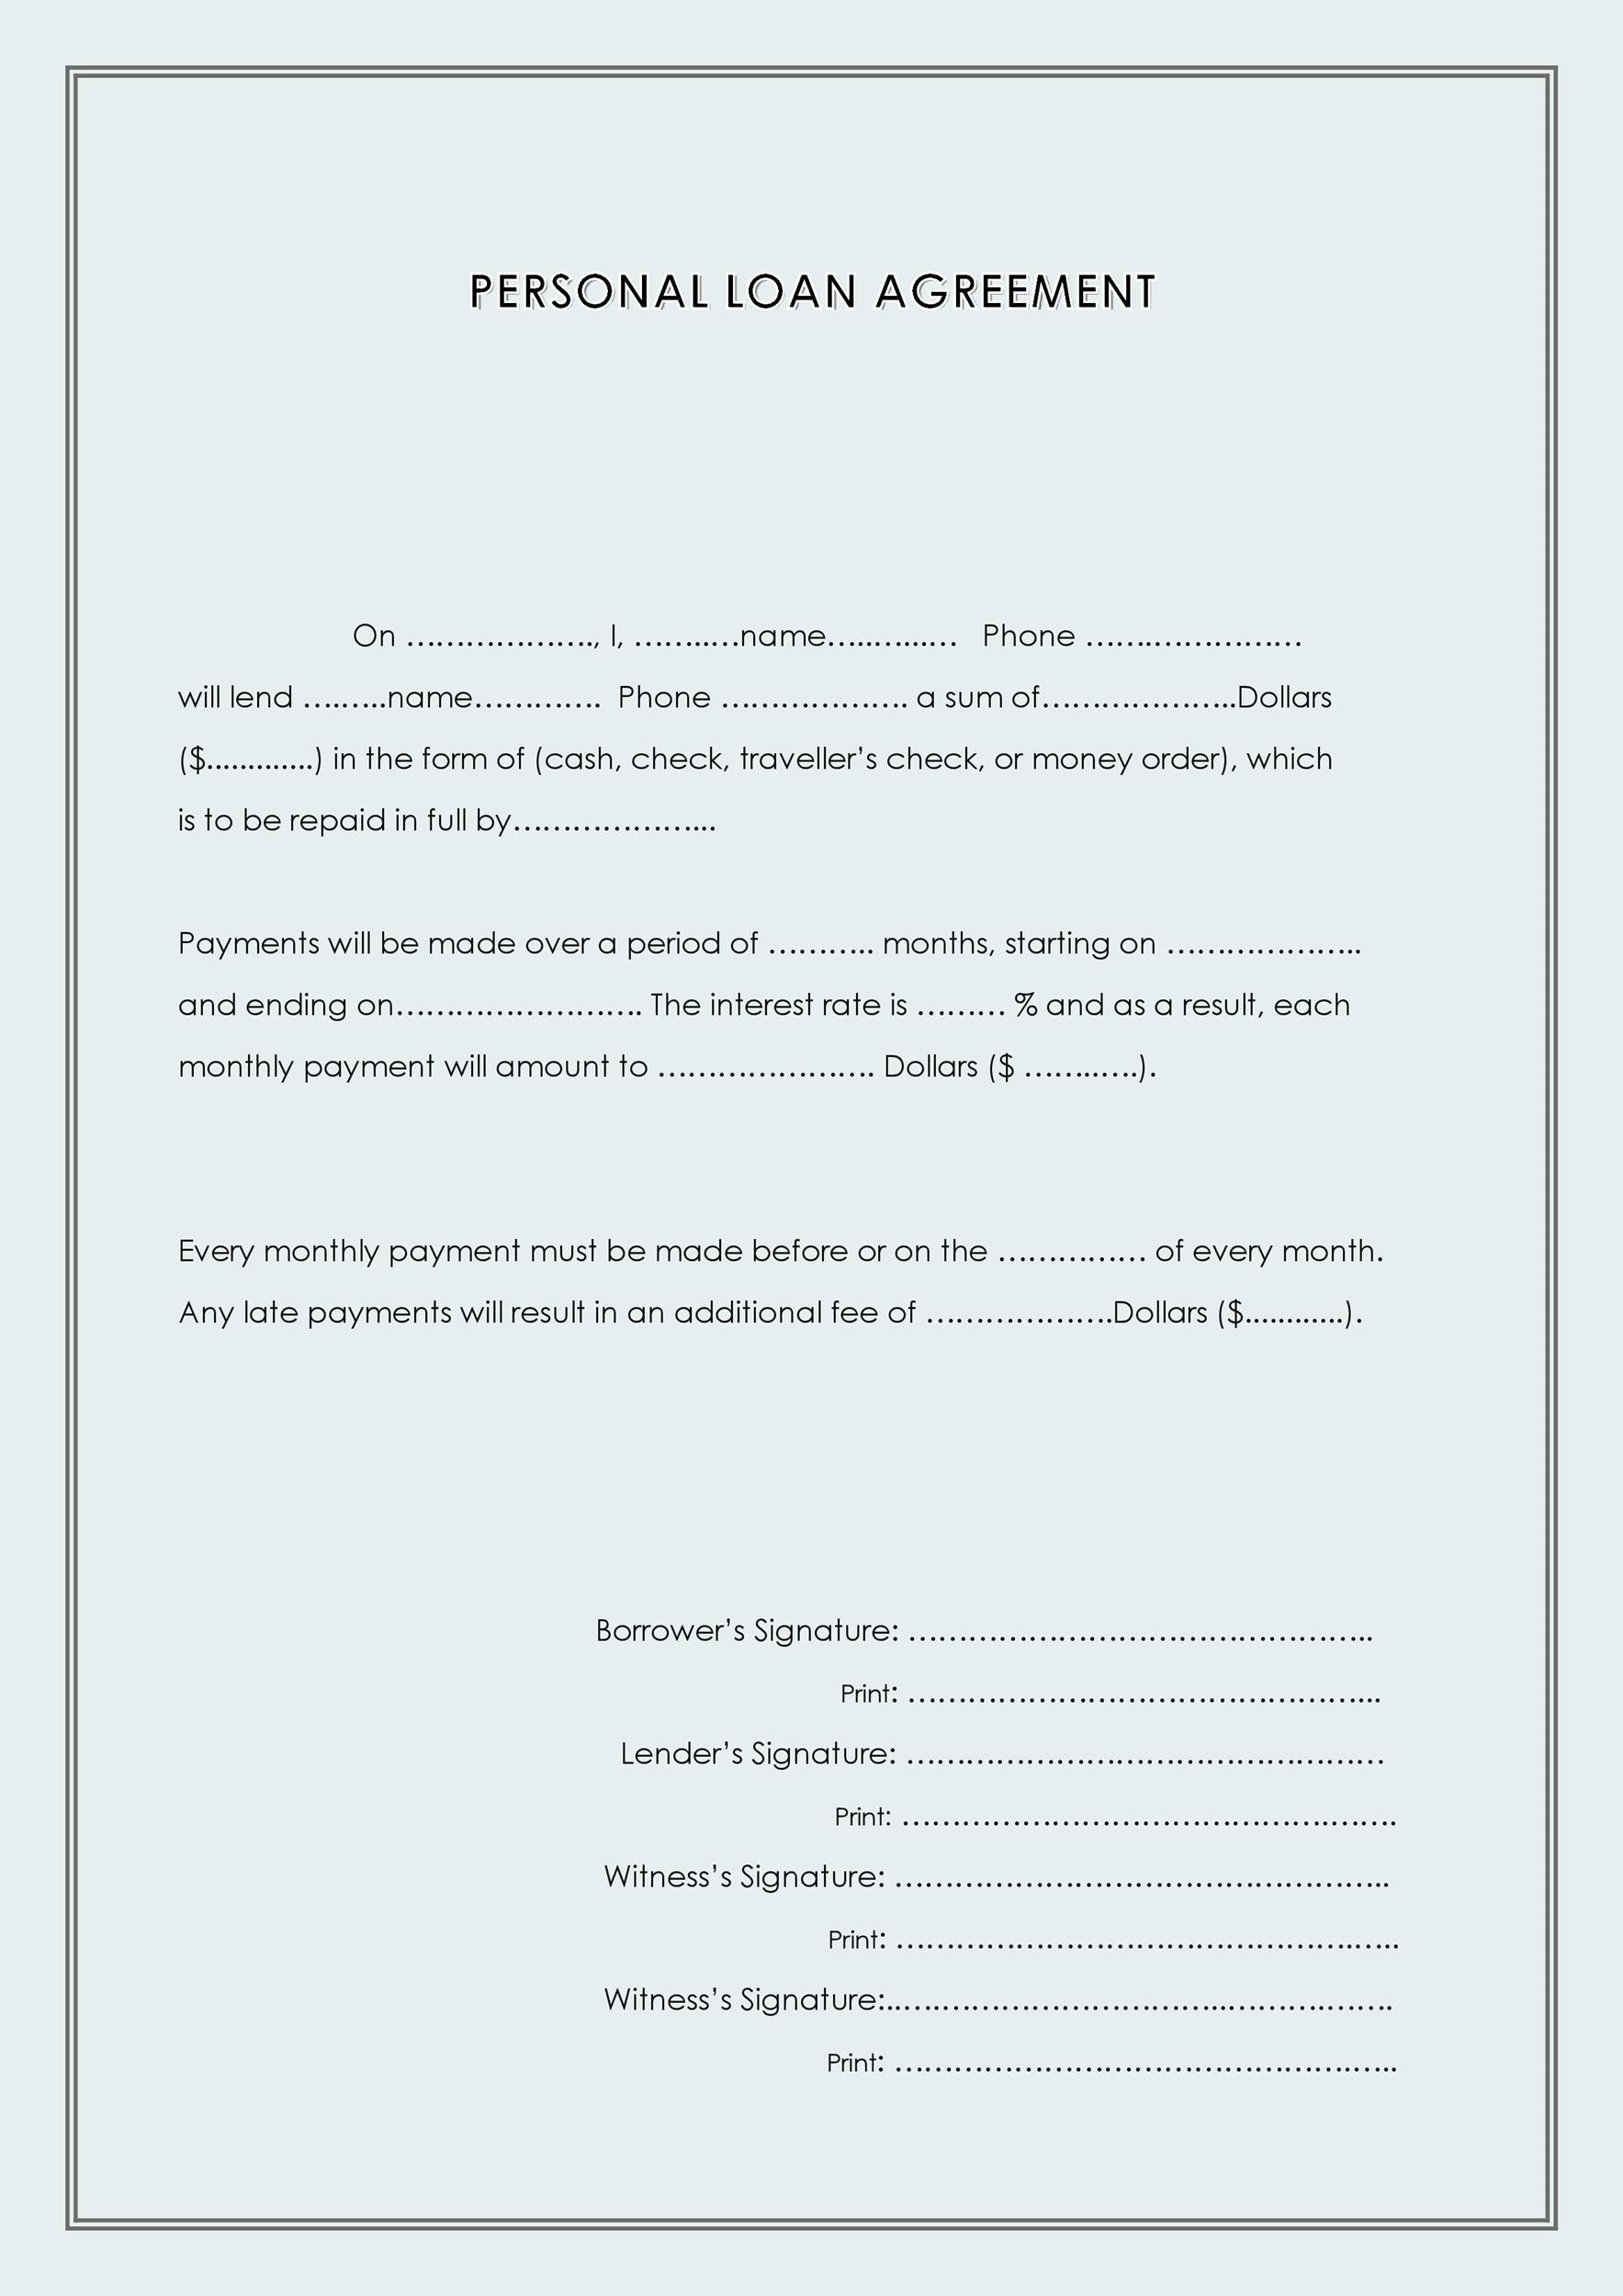 Contract for Equal Ownership of a House by an Unmarried Couple